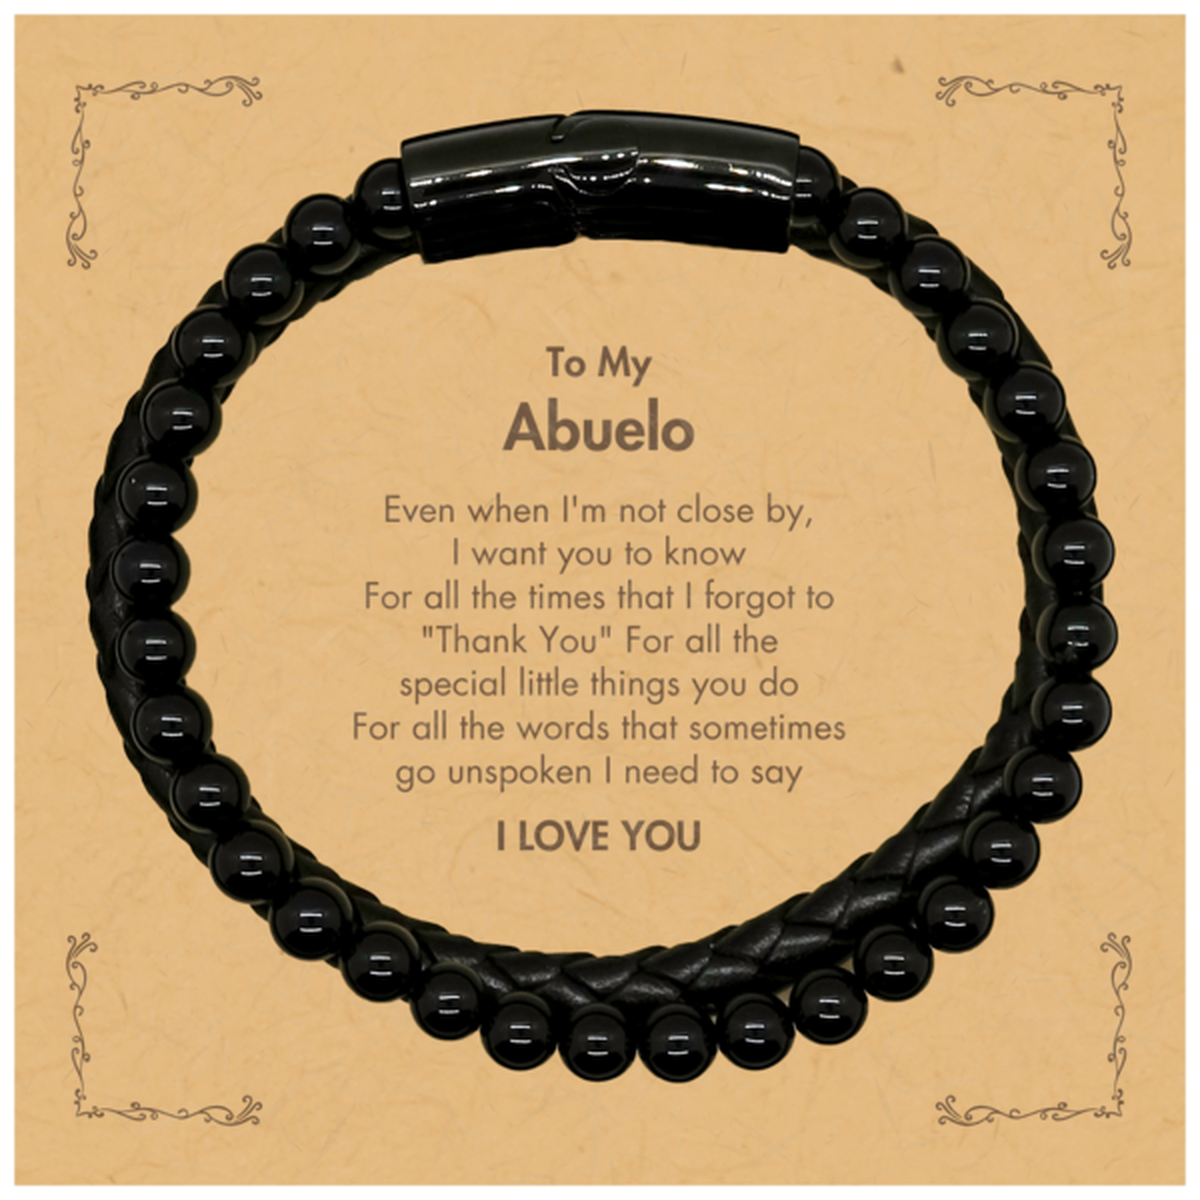 Thank You Gifts for Abuelo, Keepsake Stone Leather Bracelets Gifts for Abuelo Birthday Mother's day Father's Day Abuelo For all the words That sometimes go unspoken I need to say I LOVE YOU